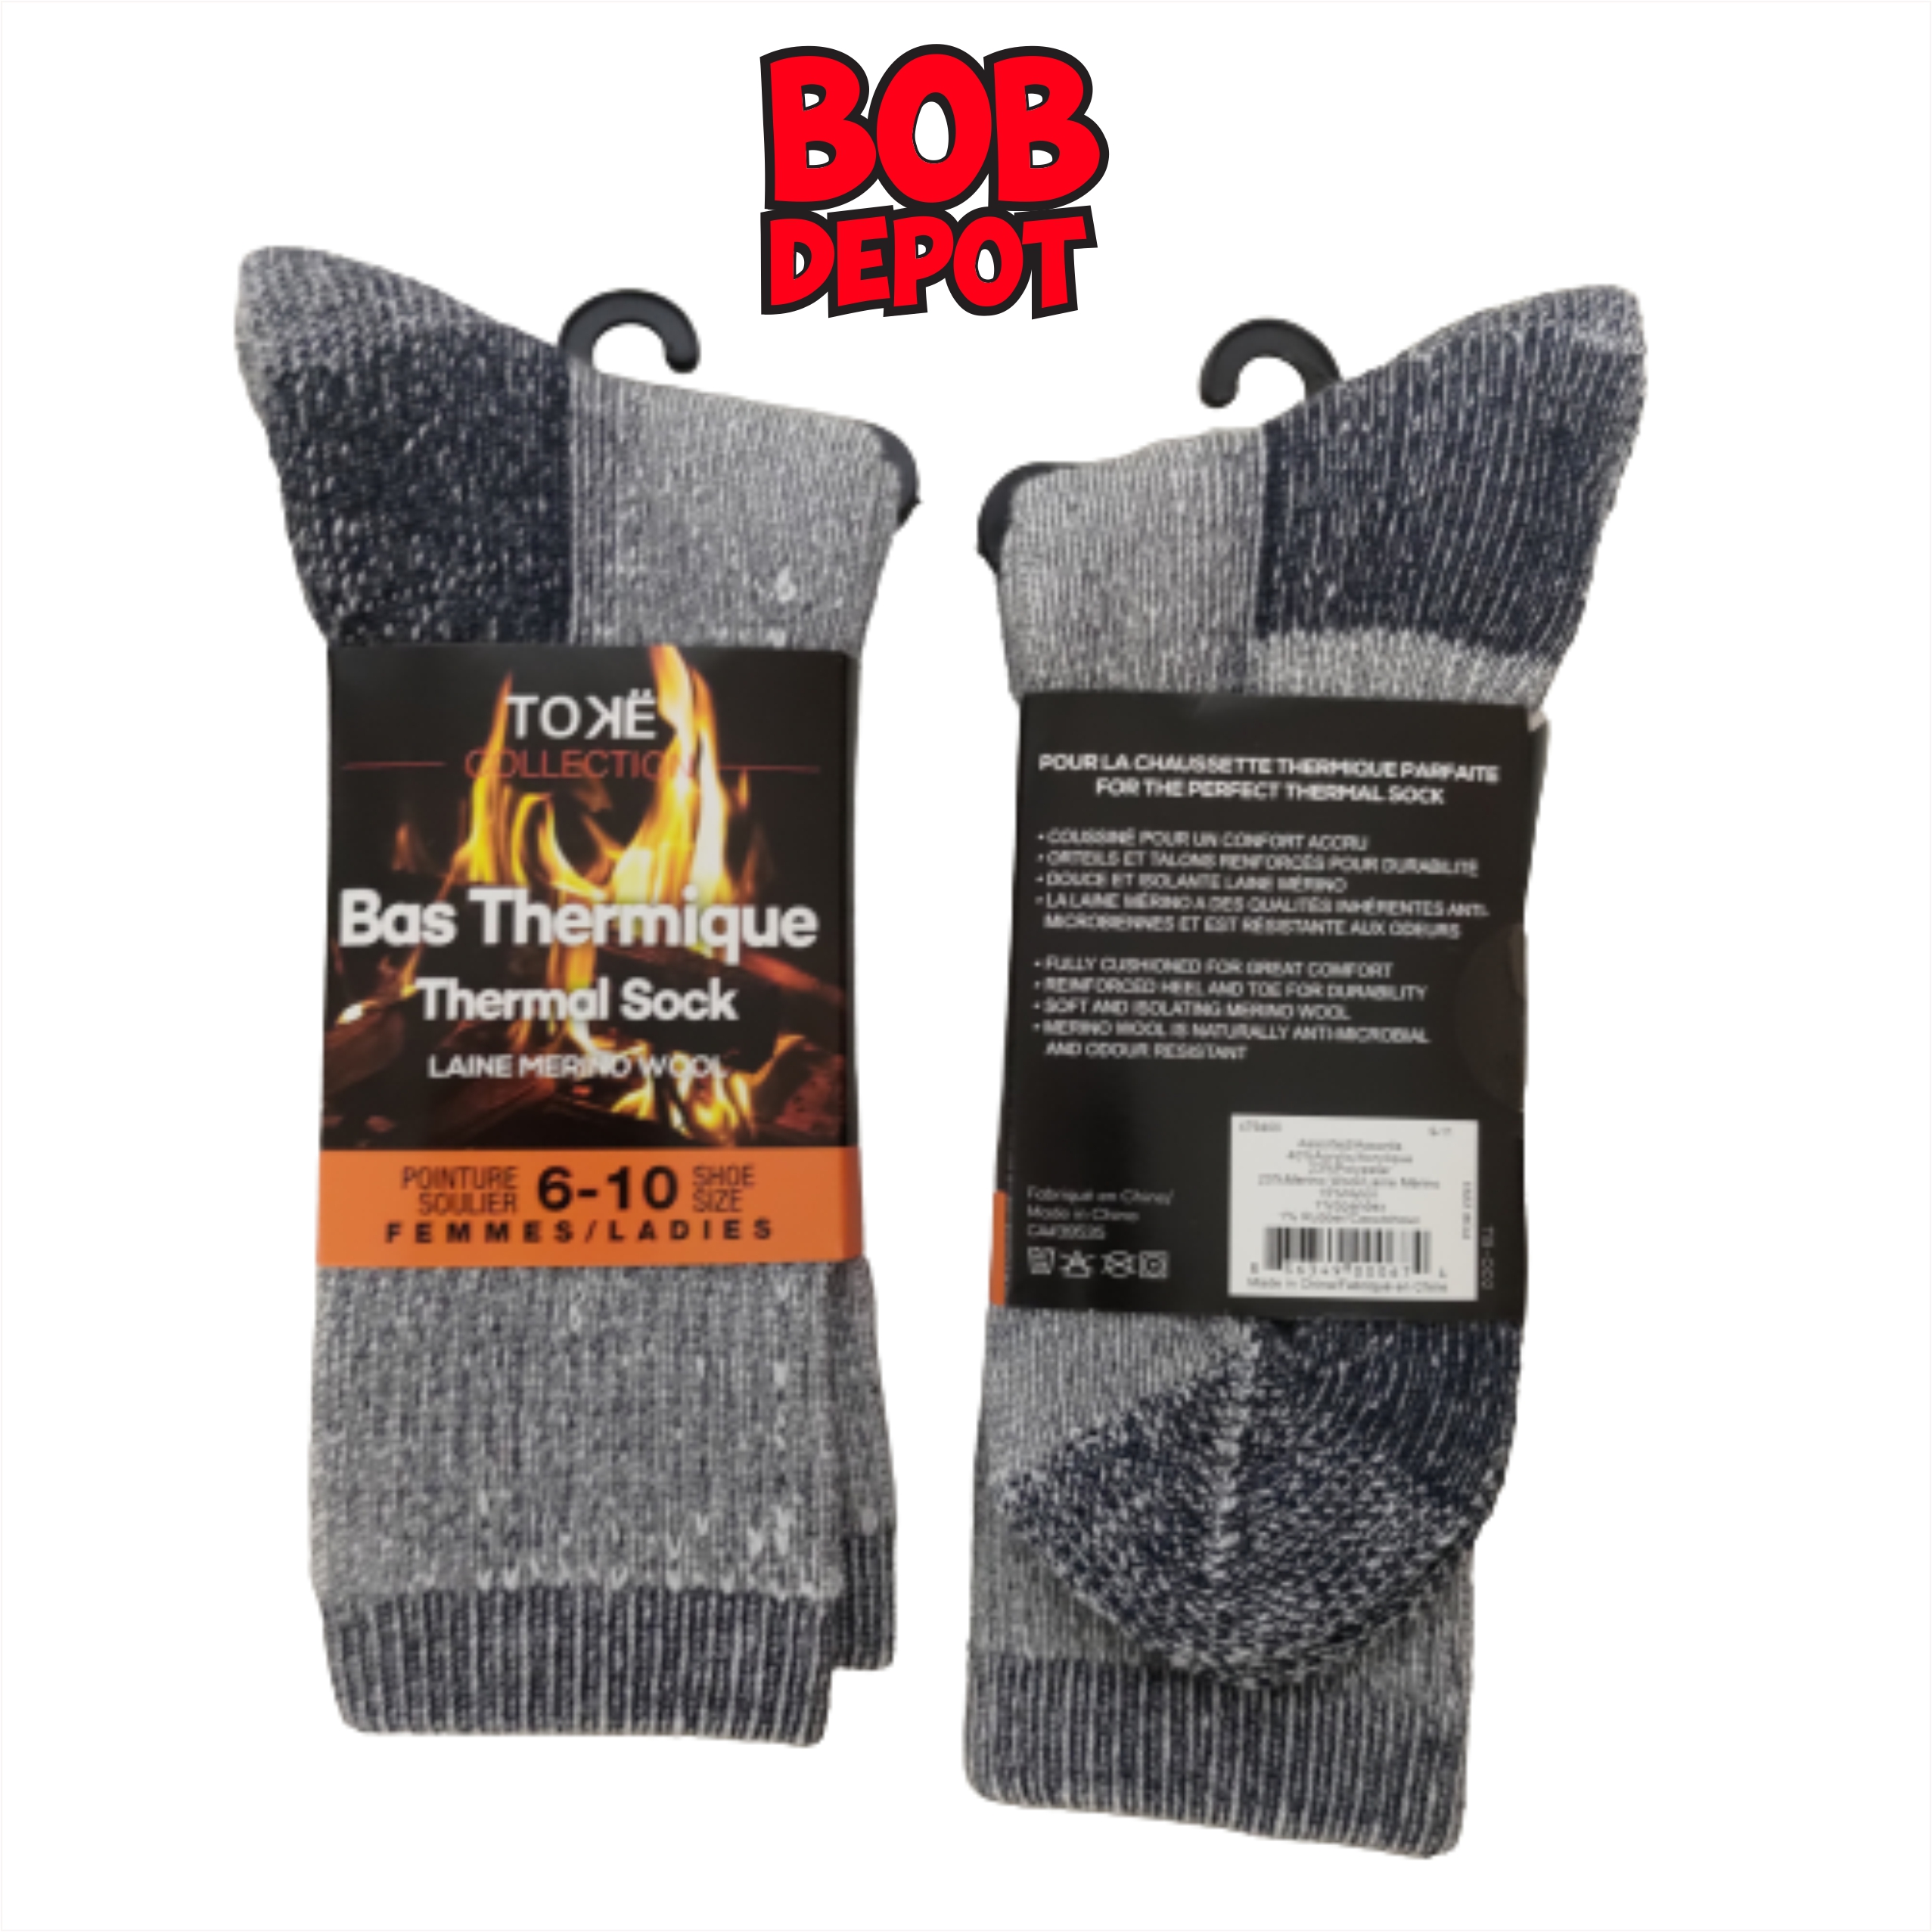 Bas/Chausettes Thermal - Laine Merino